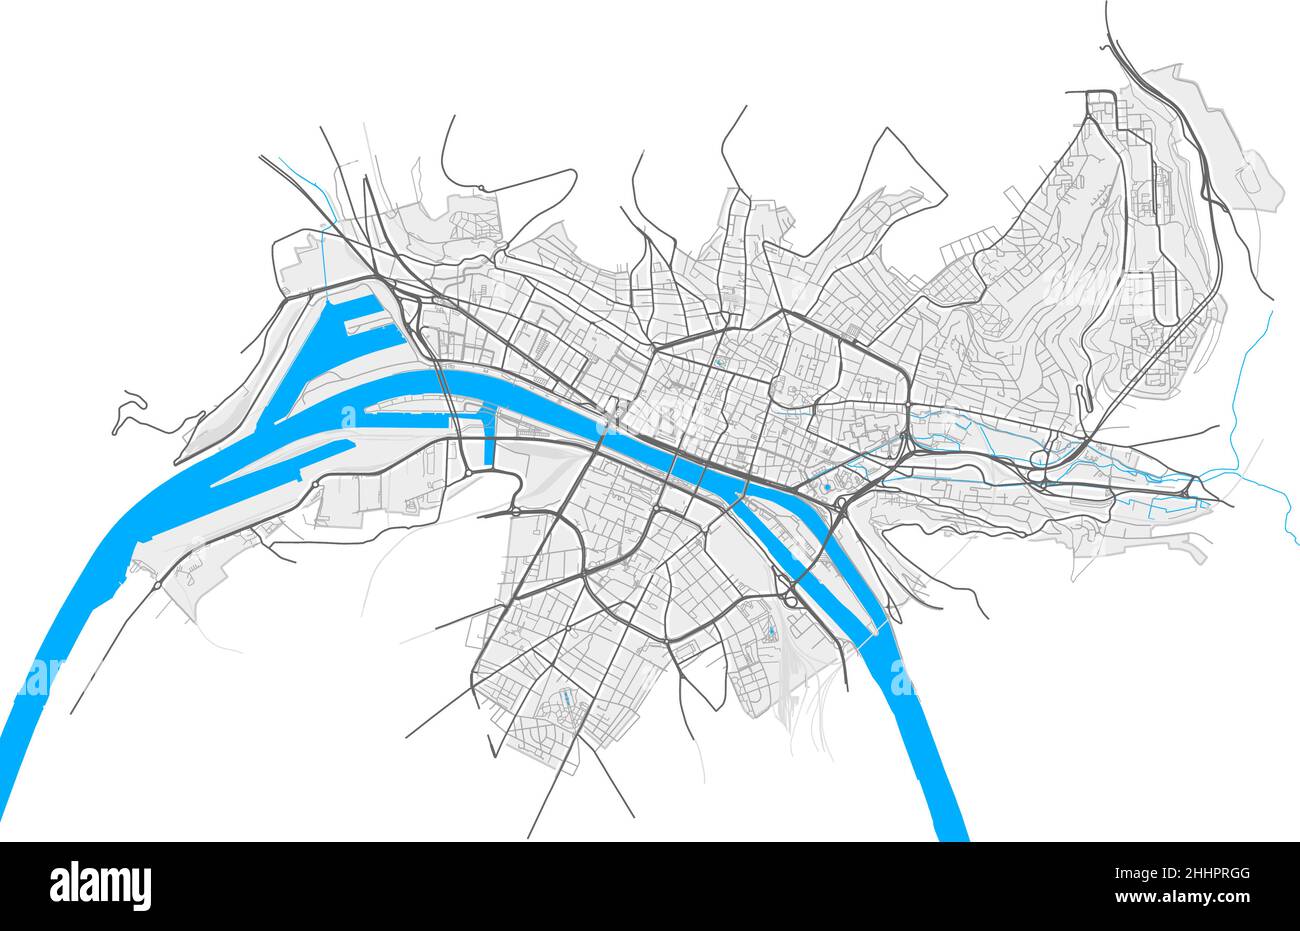 Rouen, Seine-Maritime, France high resolution vector map with city boundaries and editable paths. White outlines for main roads. Many detailed paths. Stock Vector